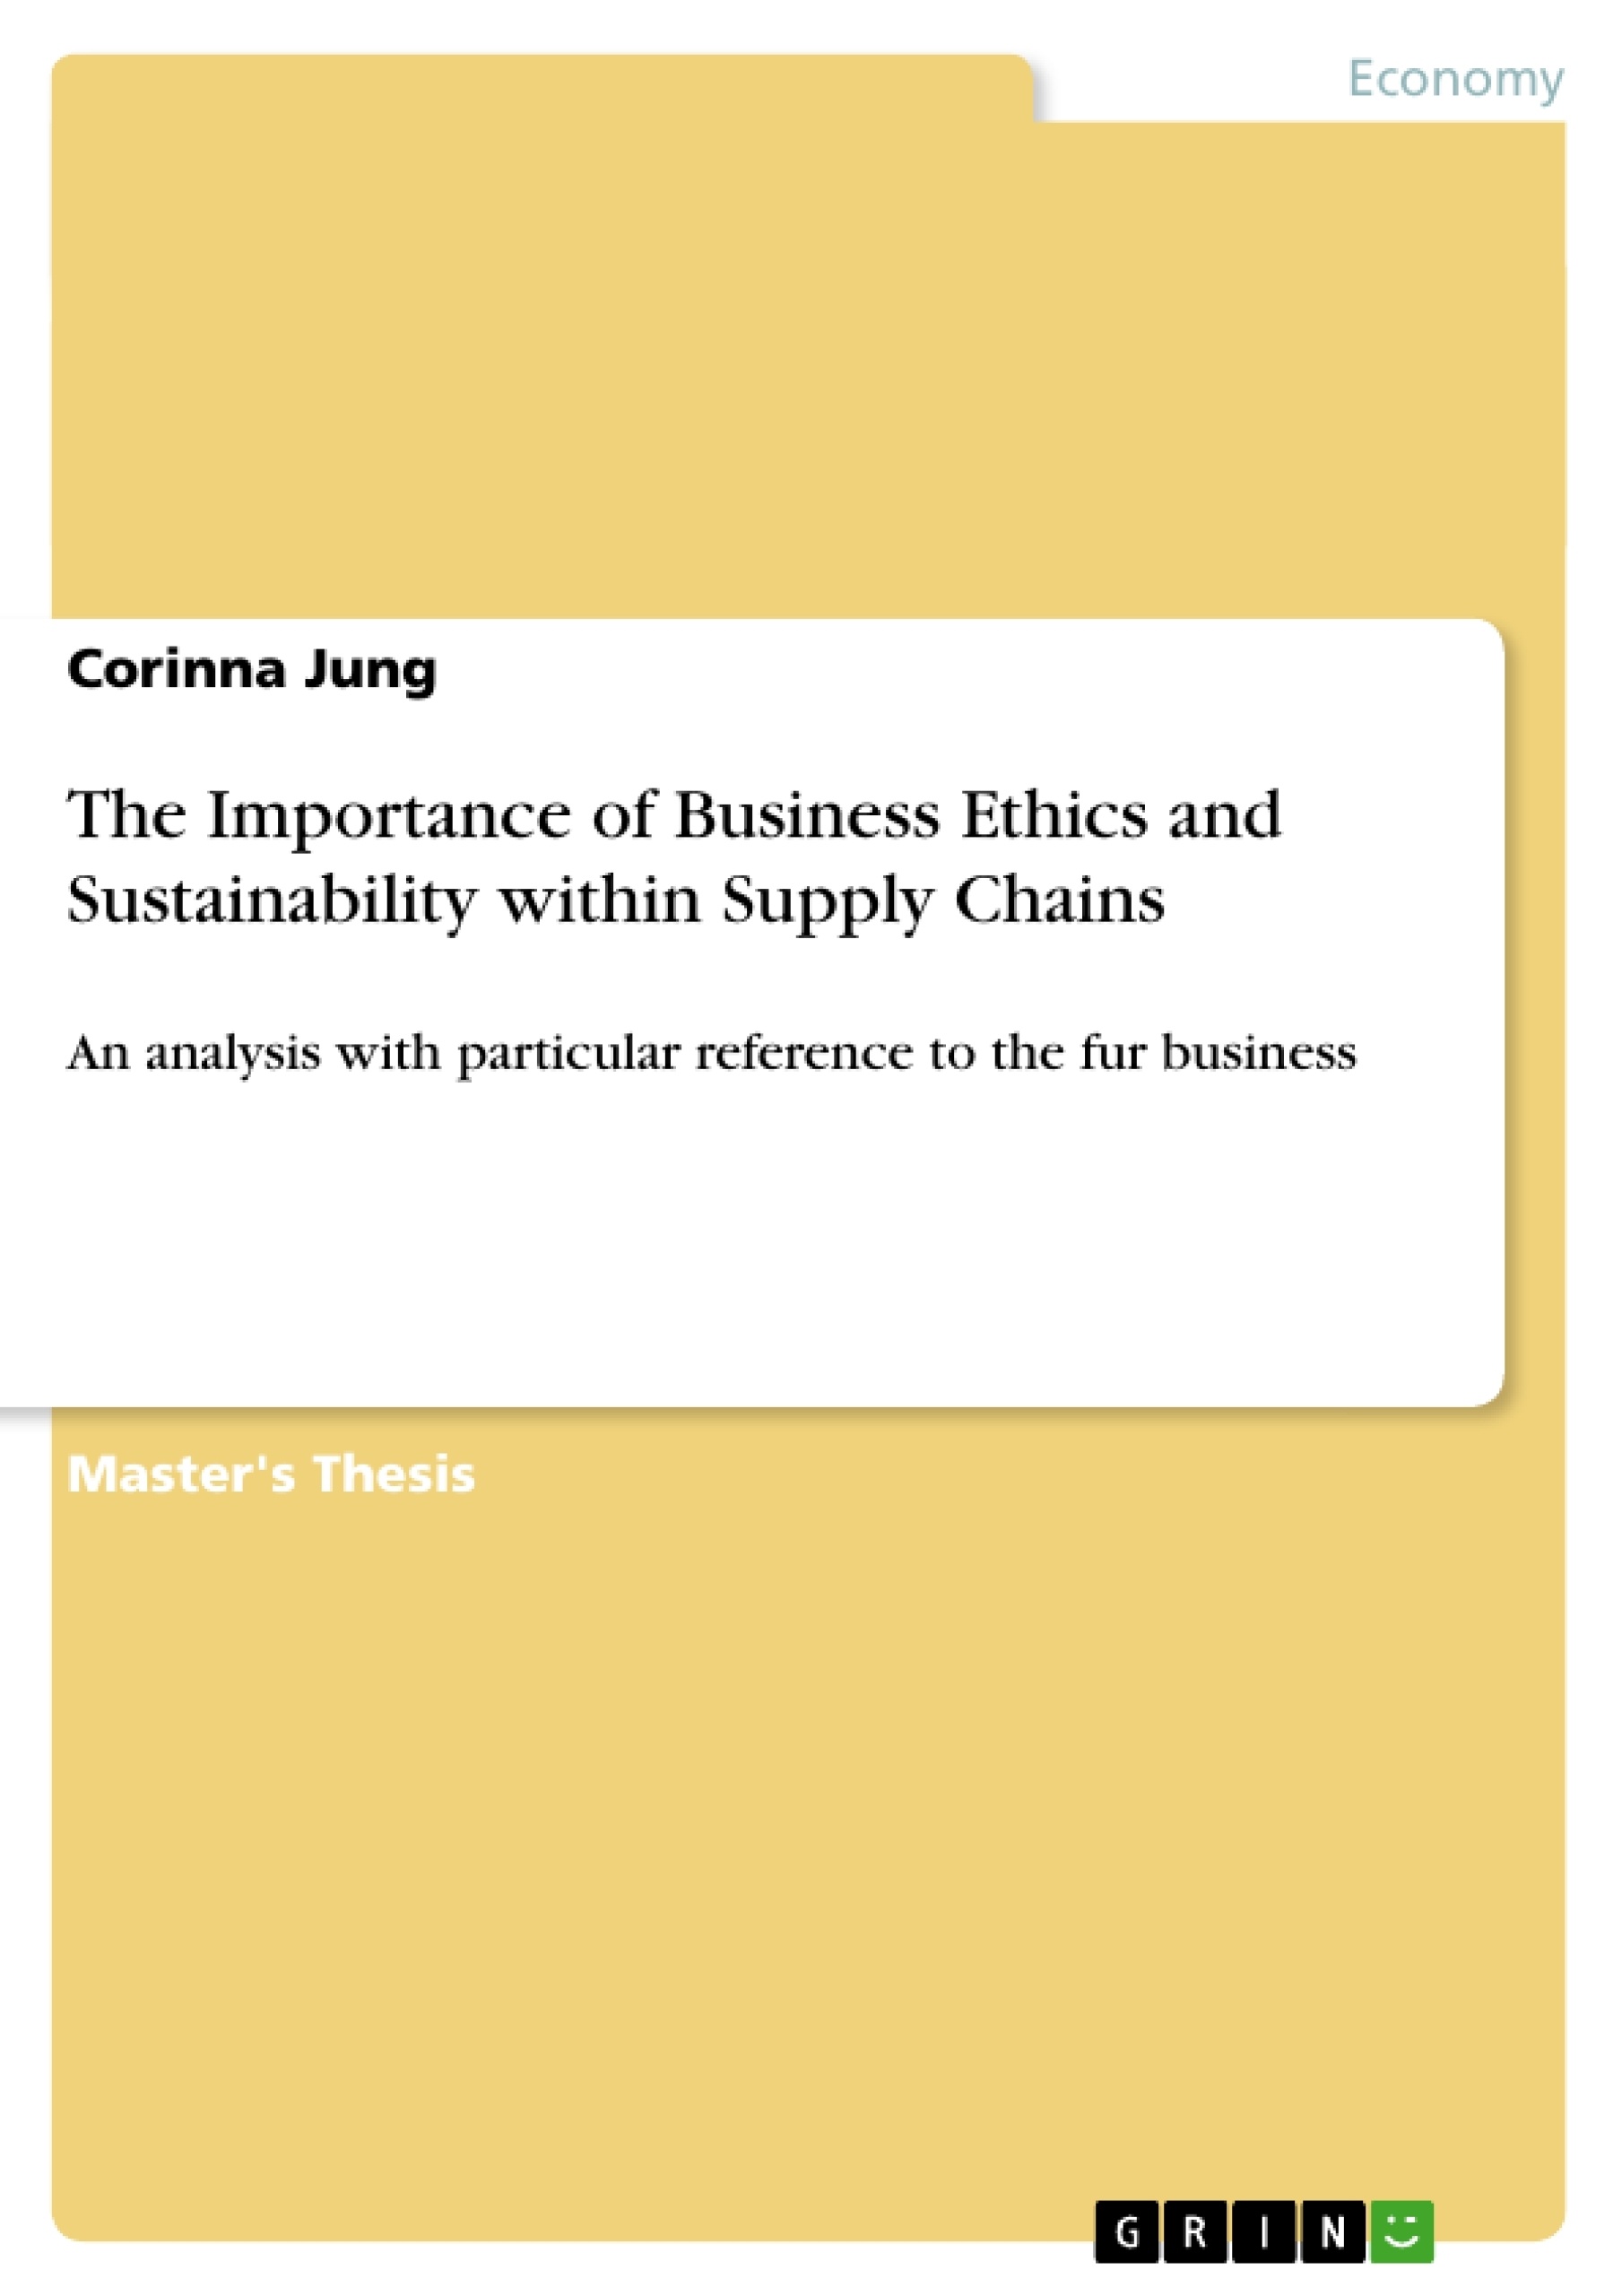 Title: The Importance of Business Ethics and Sustainability within Supply Chains